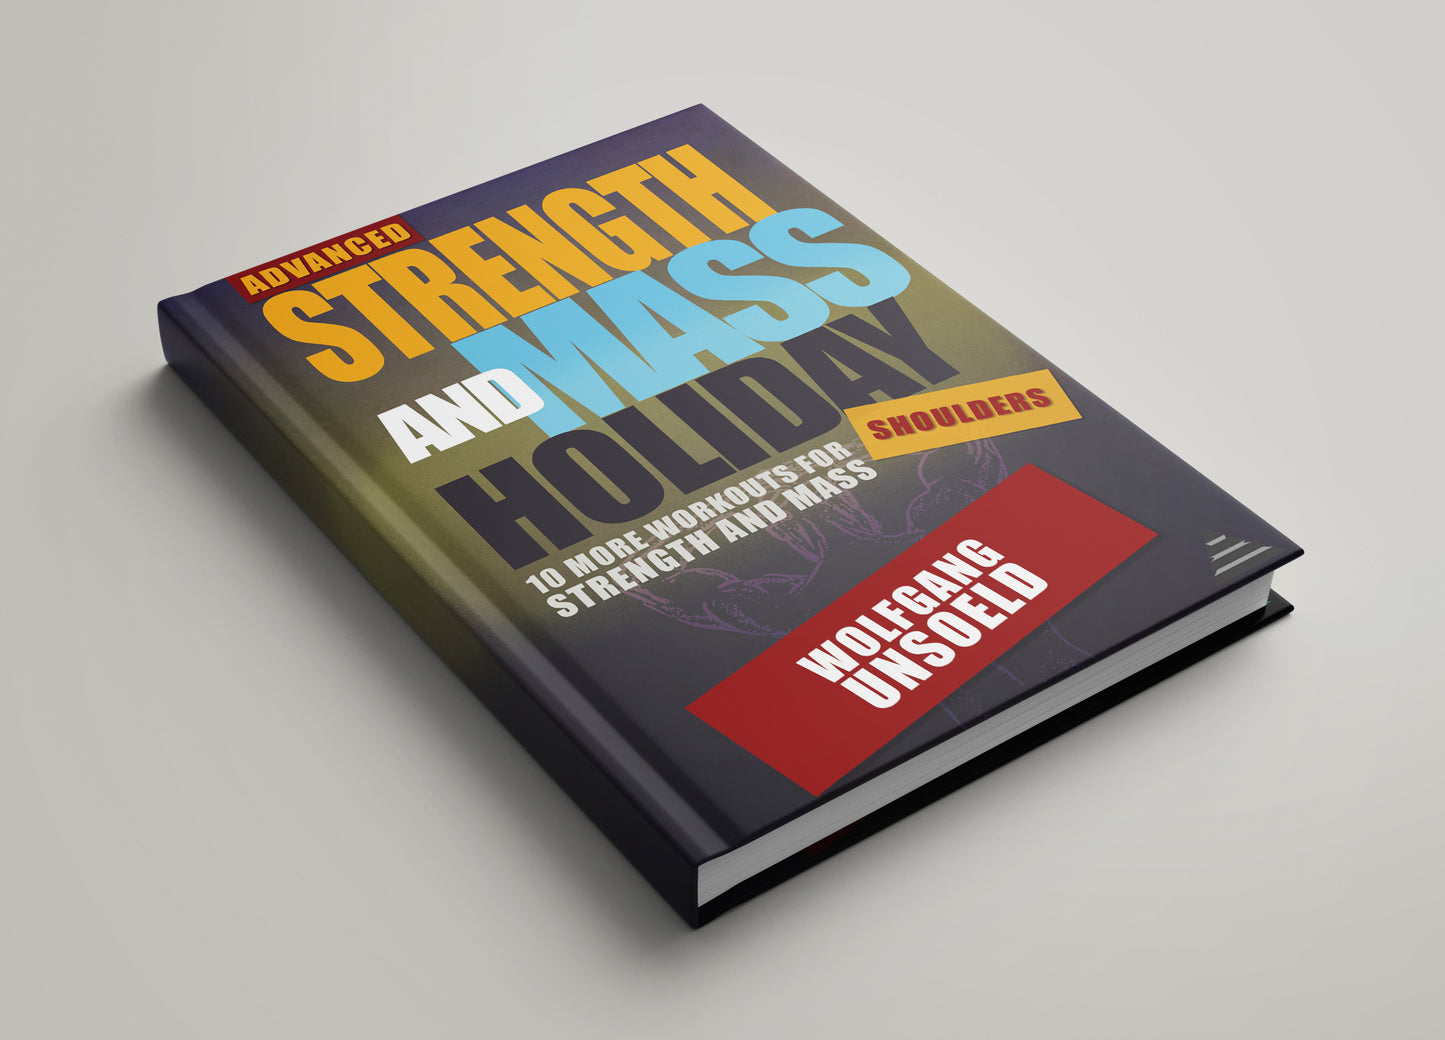 eBook & Videos - Advanced Strength and Mass Holiday